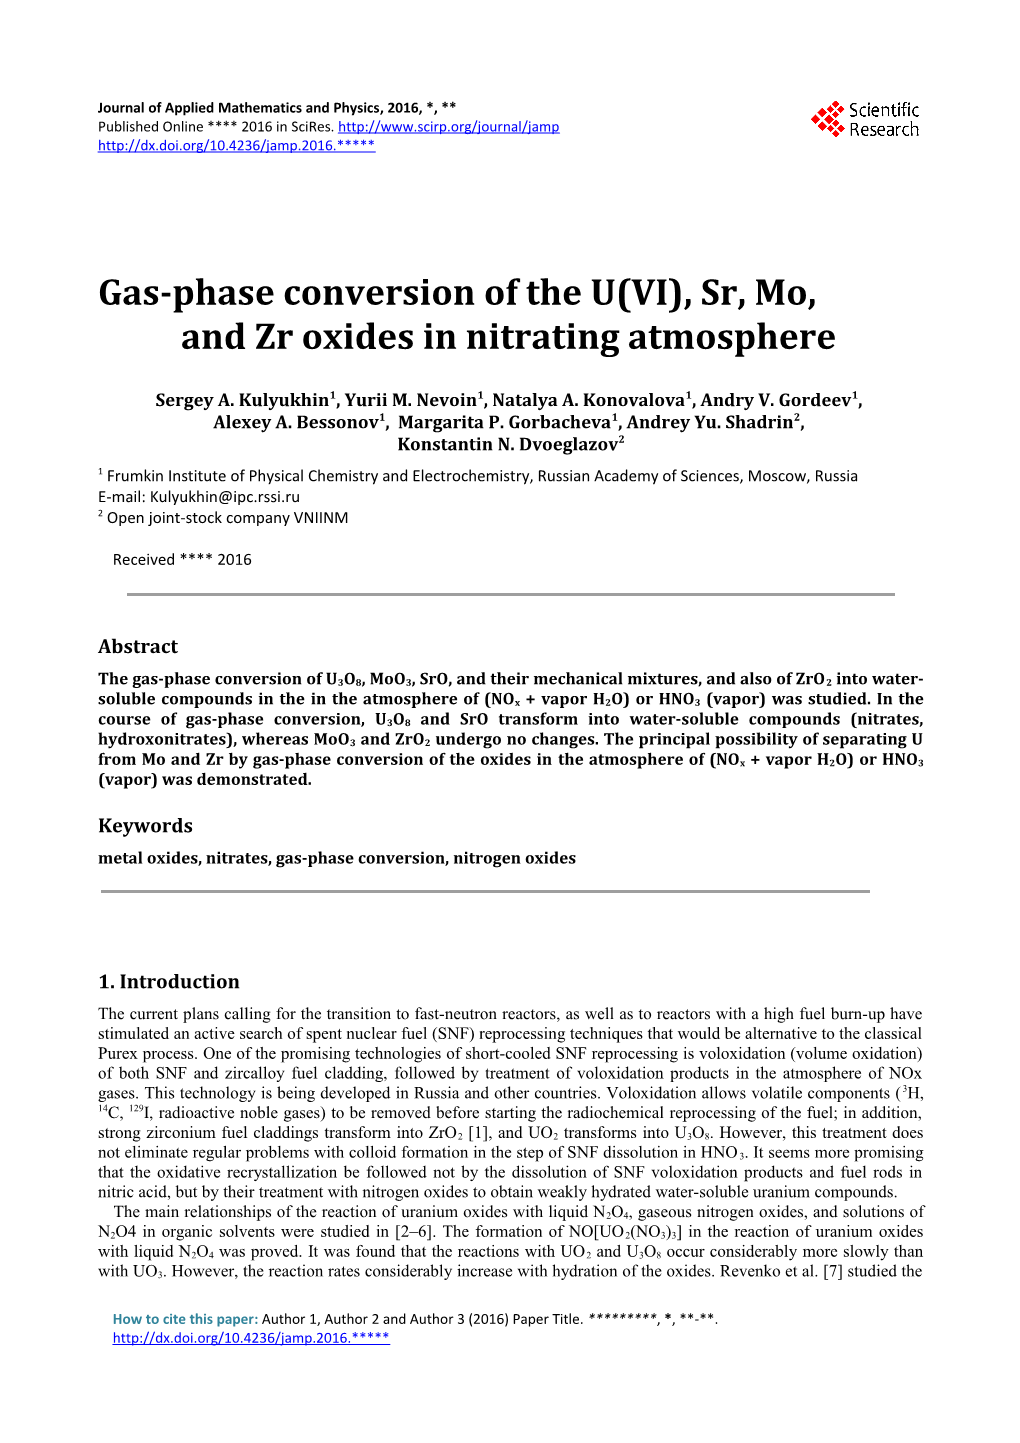 A Study of the Thermal Decomposition of Ch3131i in a Gas Flow the Presence of Various